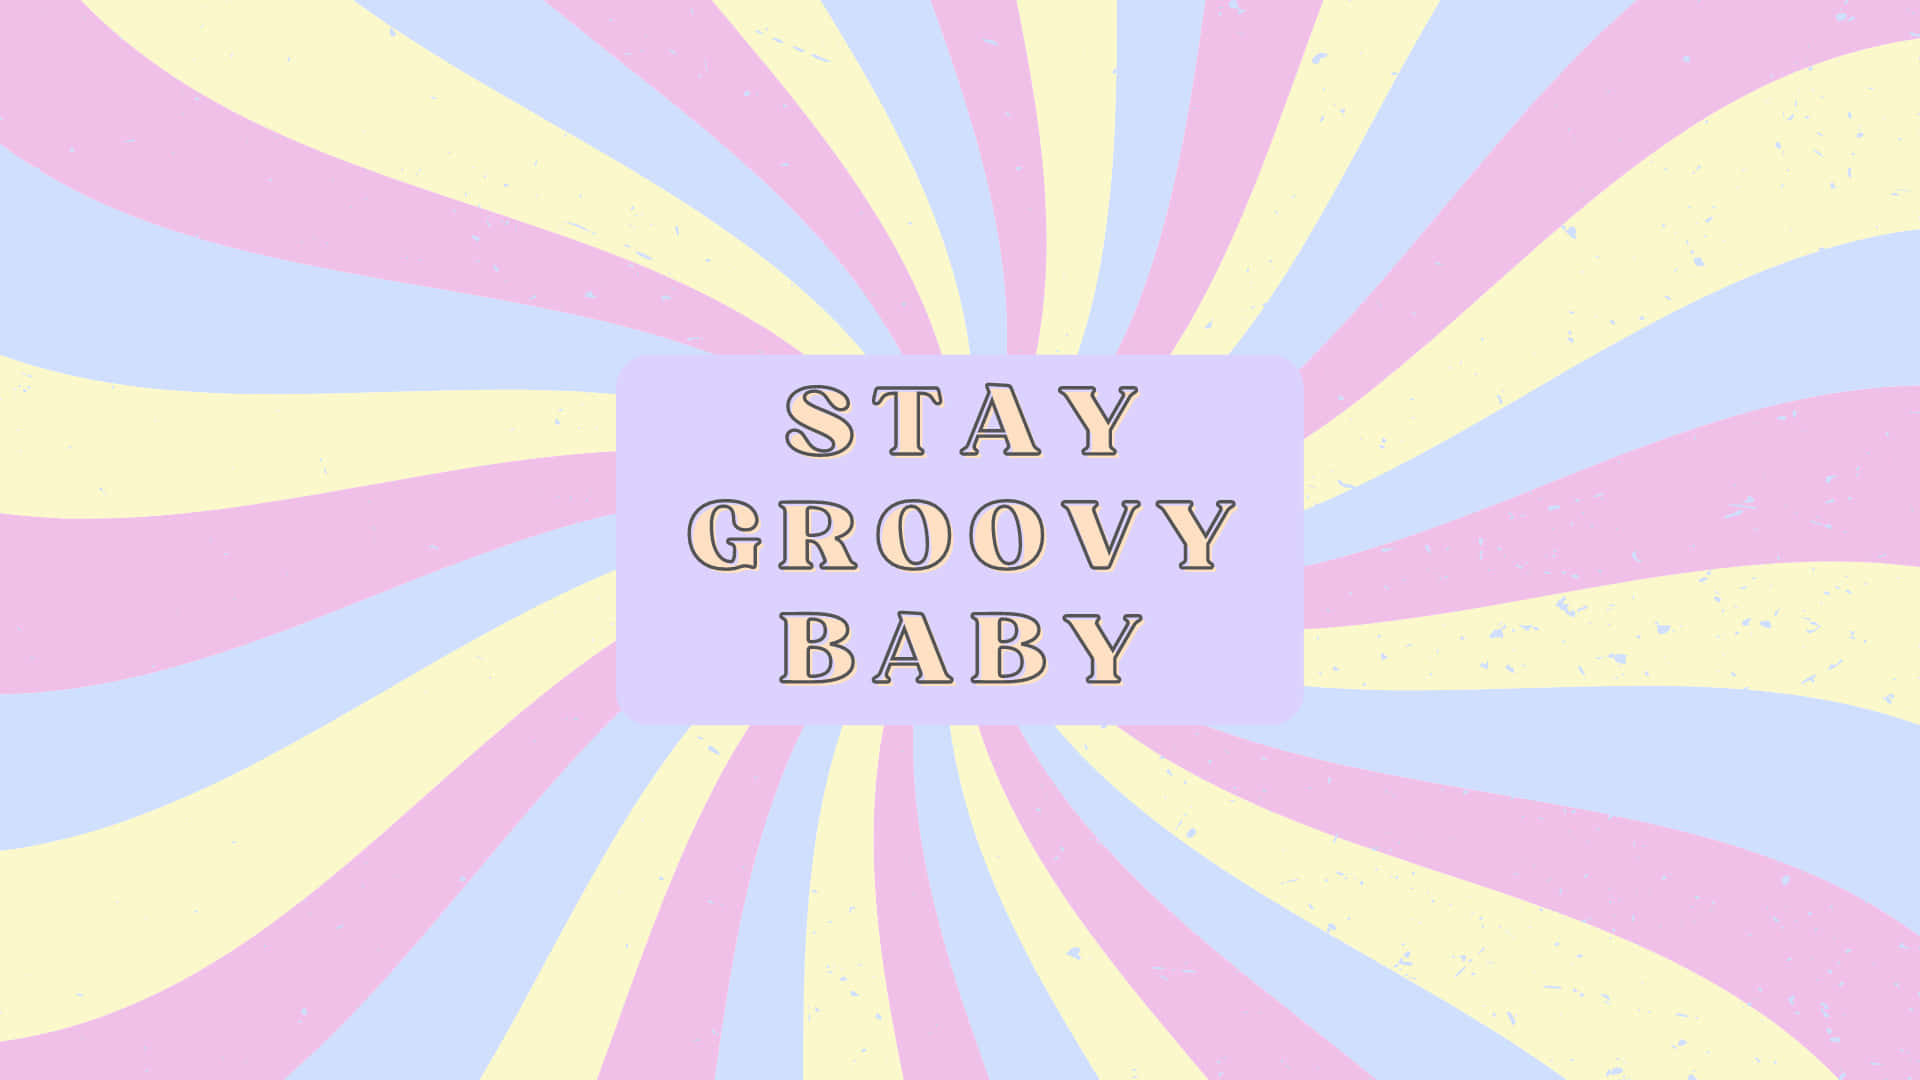 Stay Groovy Baby On A Pink And Yellow Swirl Background